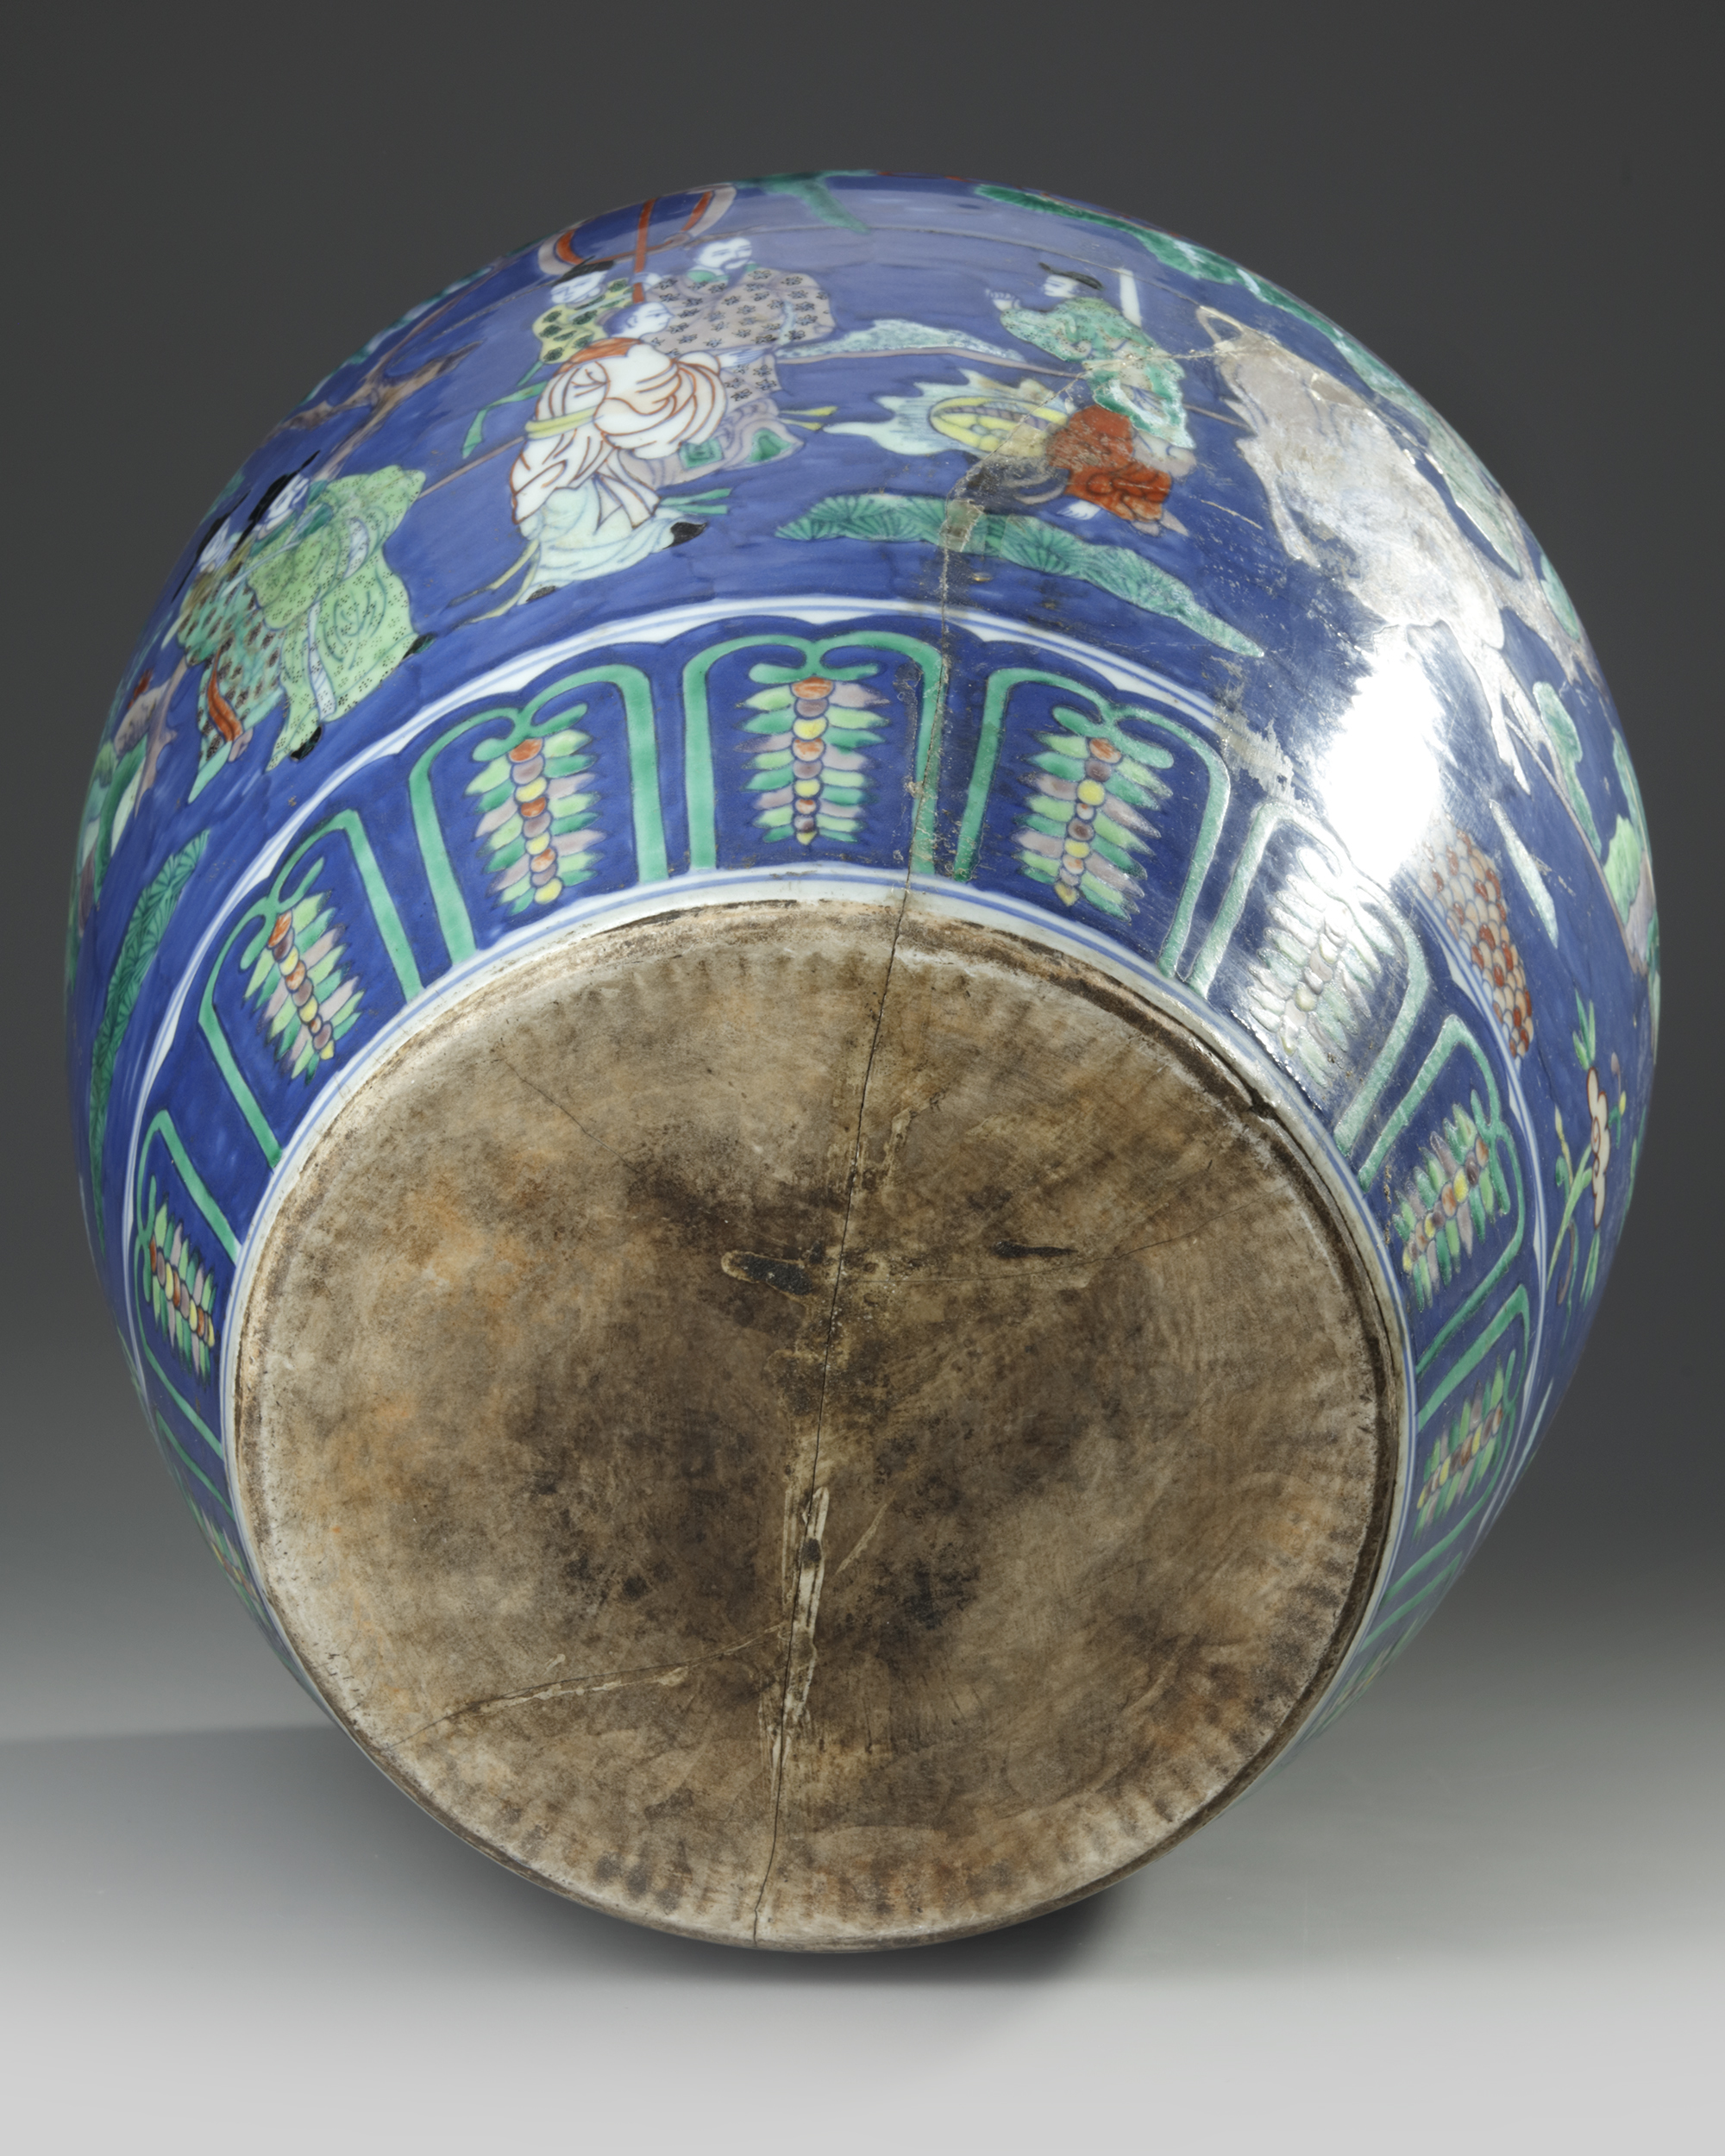 A CHINESE DOUCAI BLUE GROUND VASE, QING DYNASTY (1644-1911) - Image 4 of 4